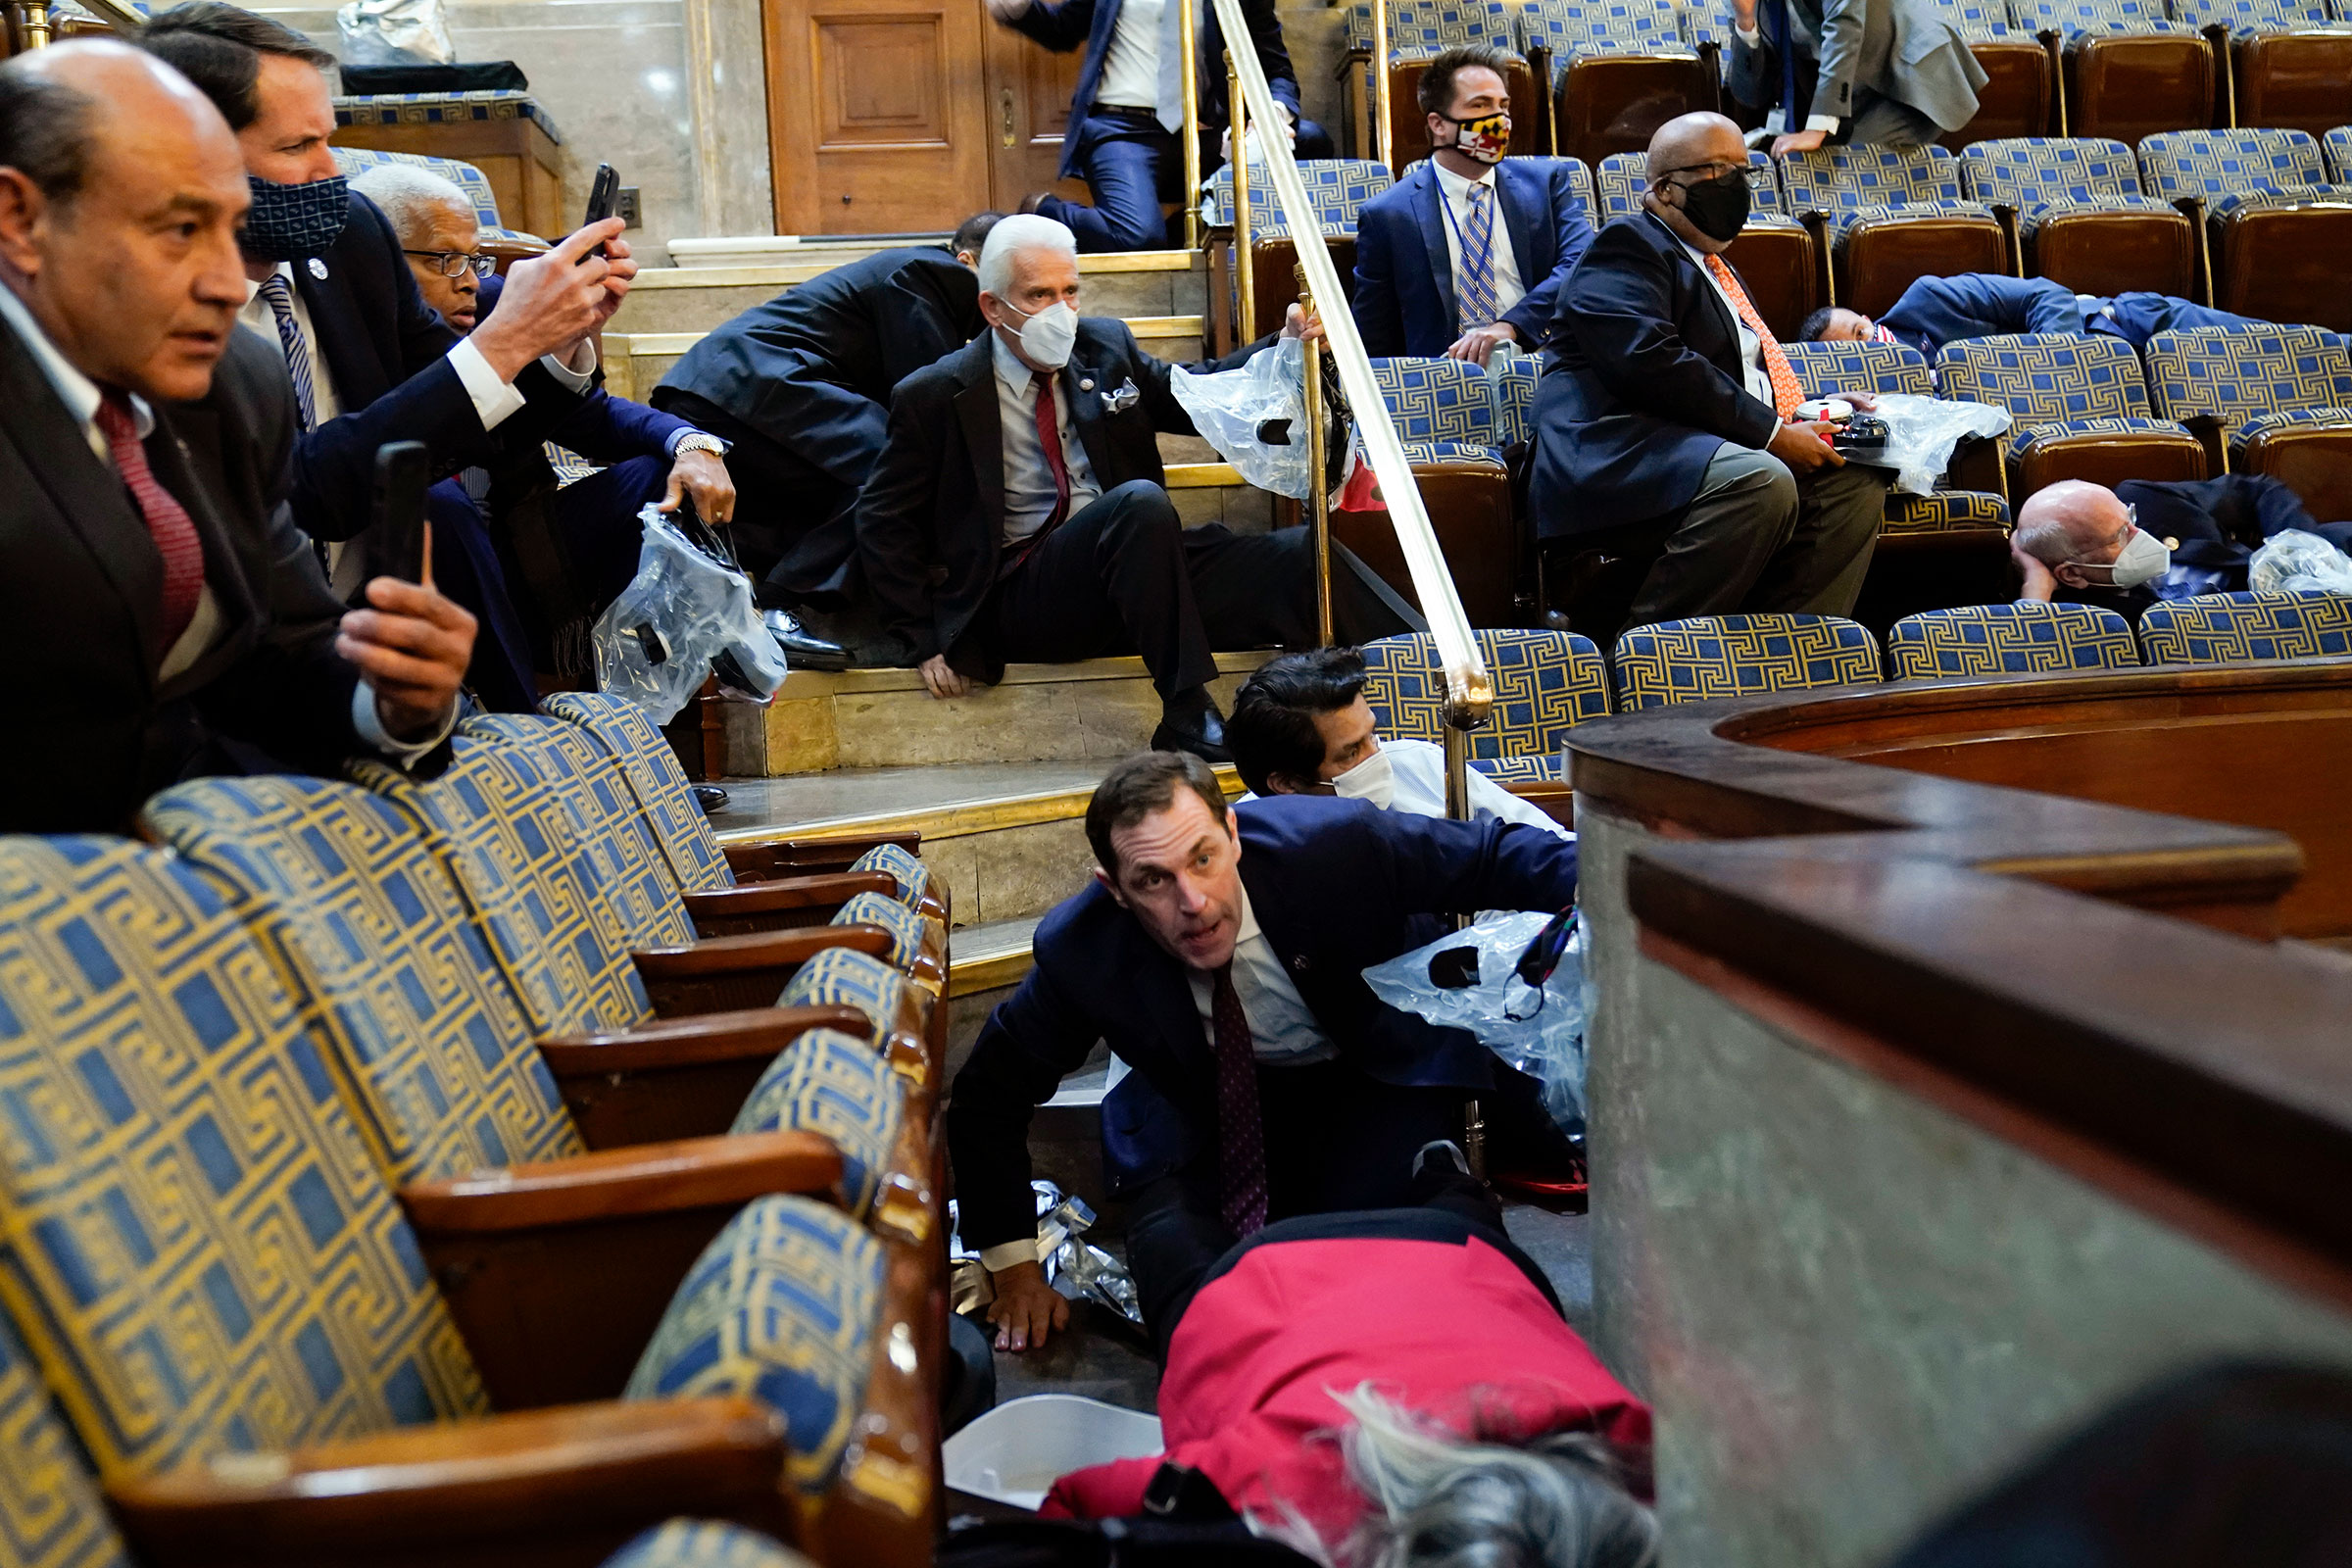 People shelter in the House gallery as protesters try to break into the House Chamber on Jan. 6, 2021.